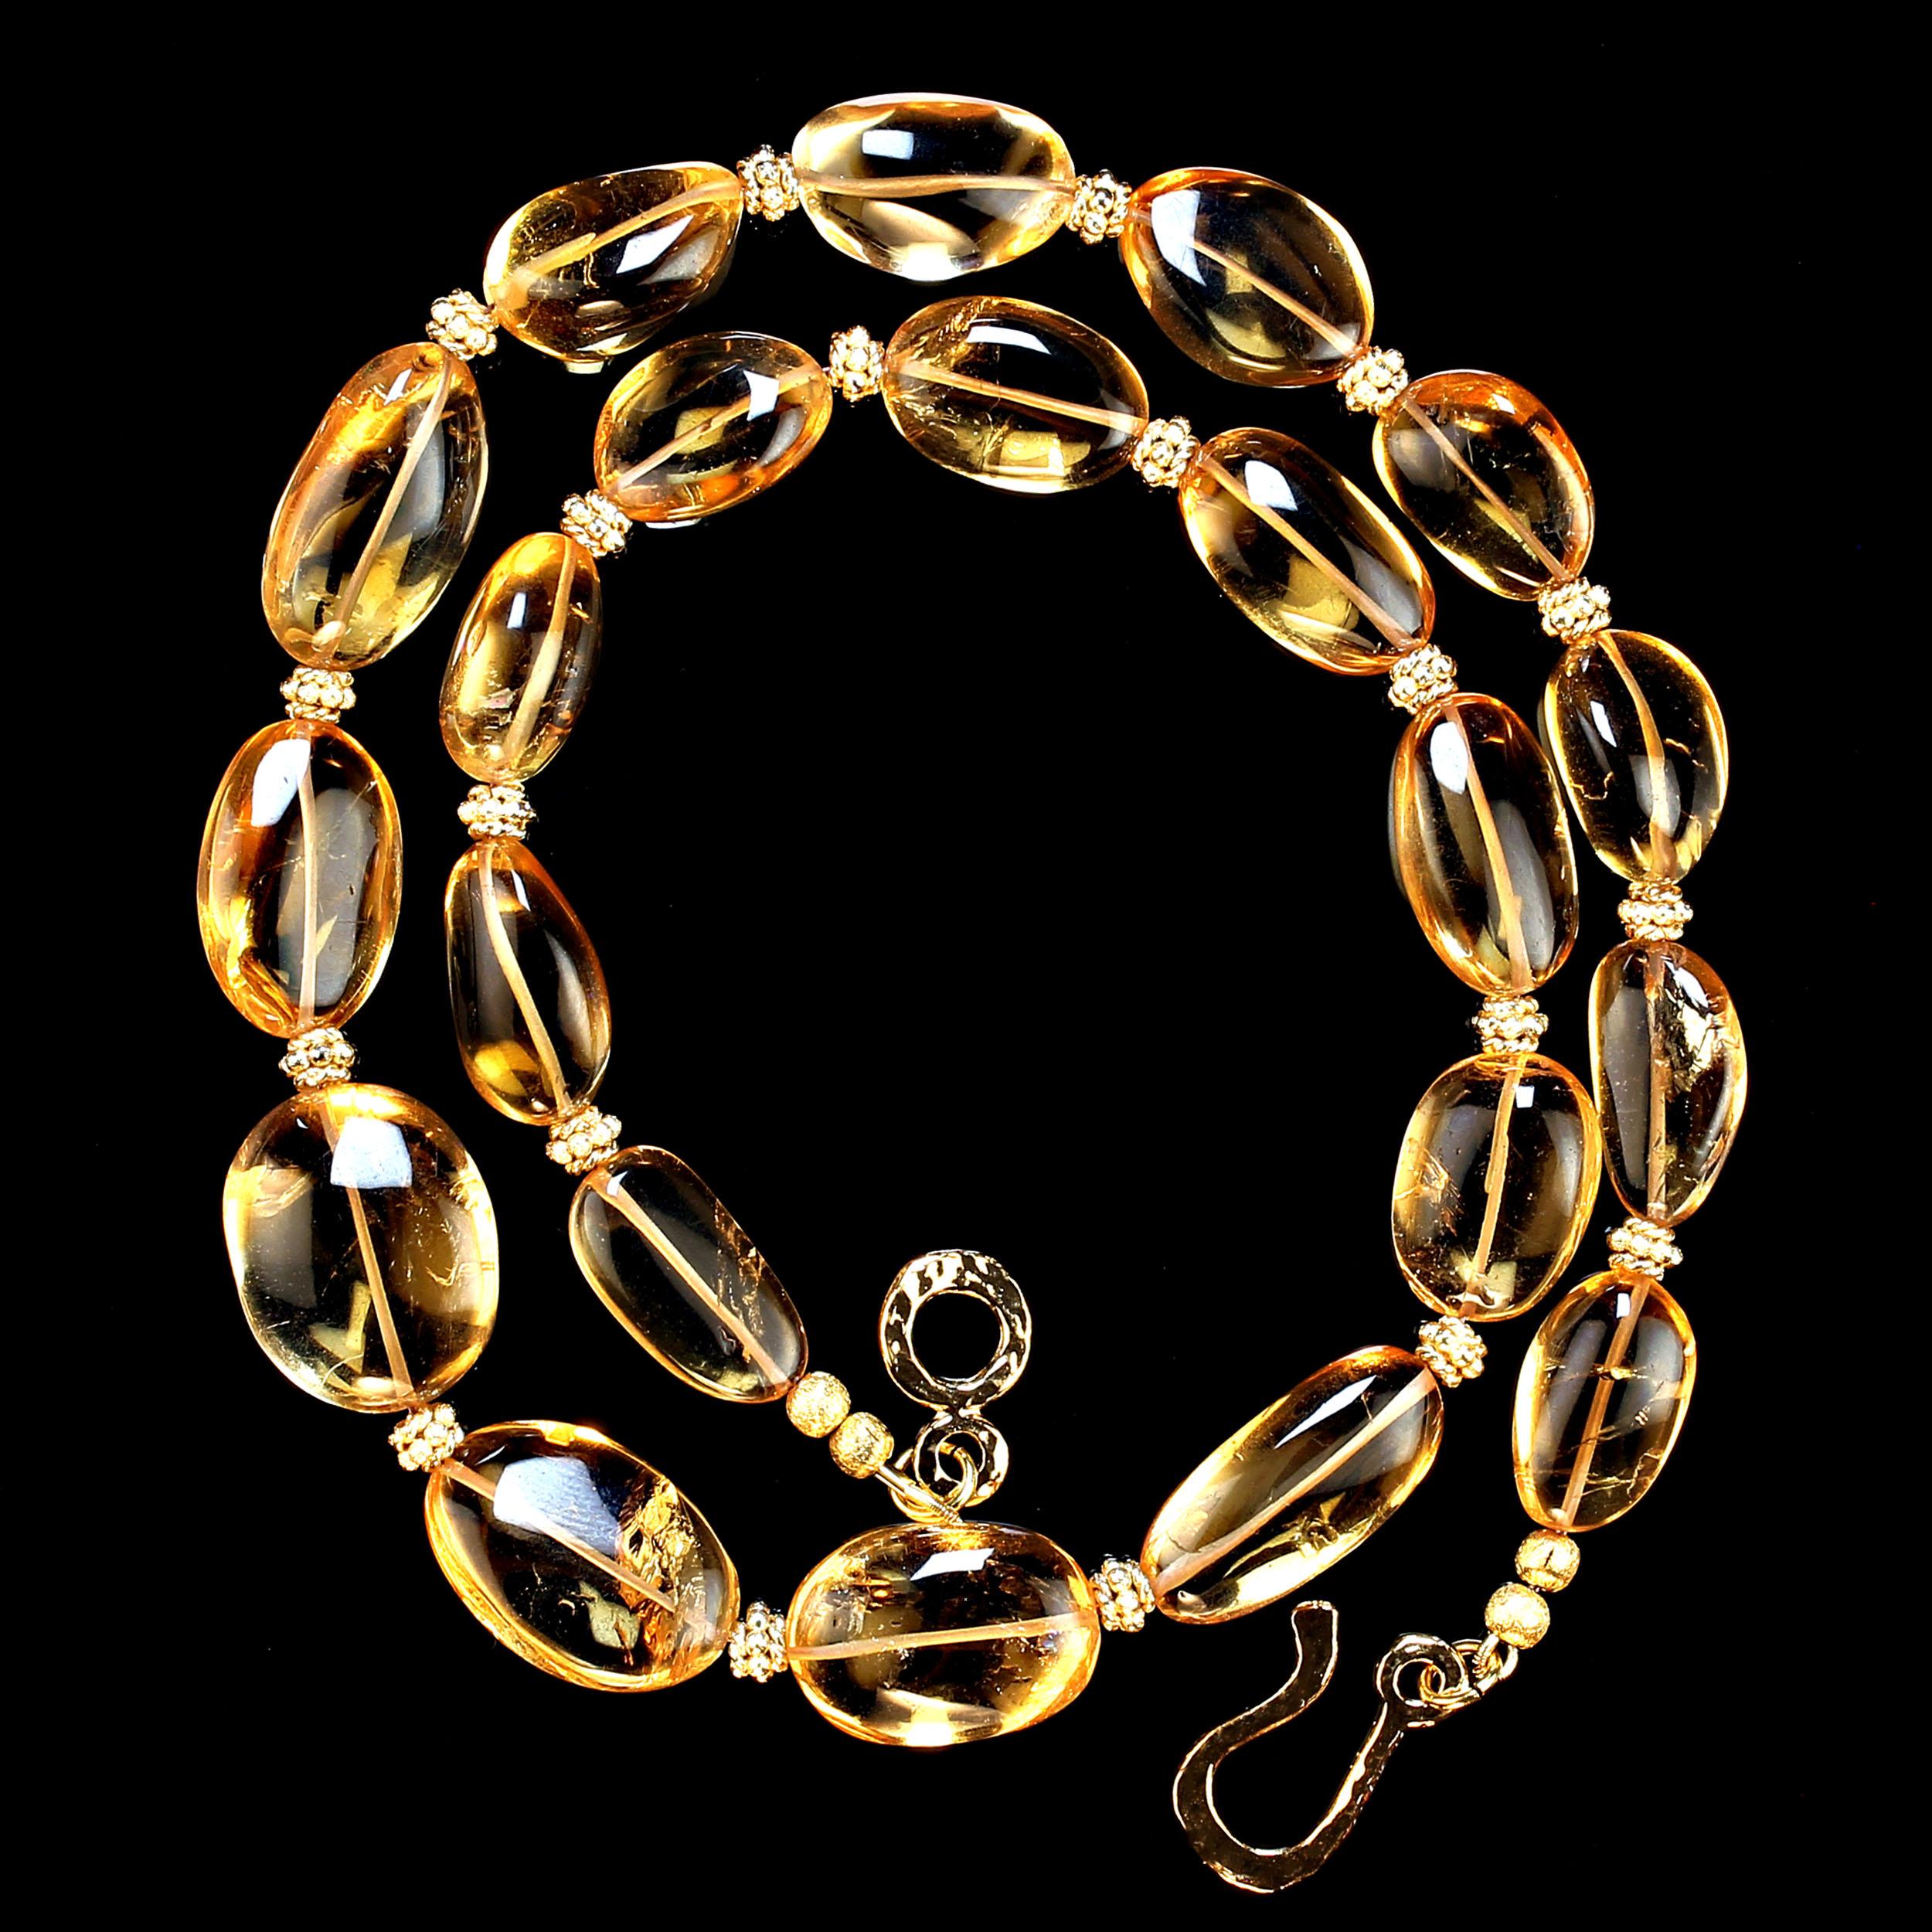 Artisan Warm and Glowing Citrine nuggets with goldy accents 21 inch necklace Great Gift! For Sale